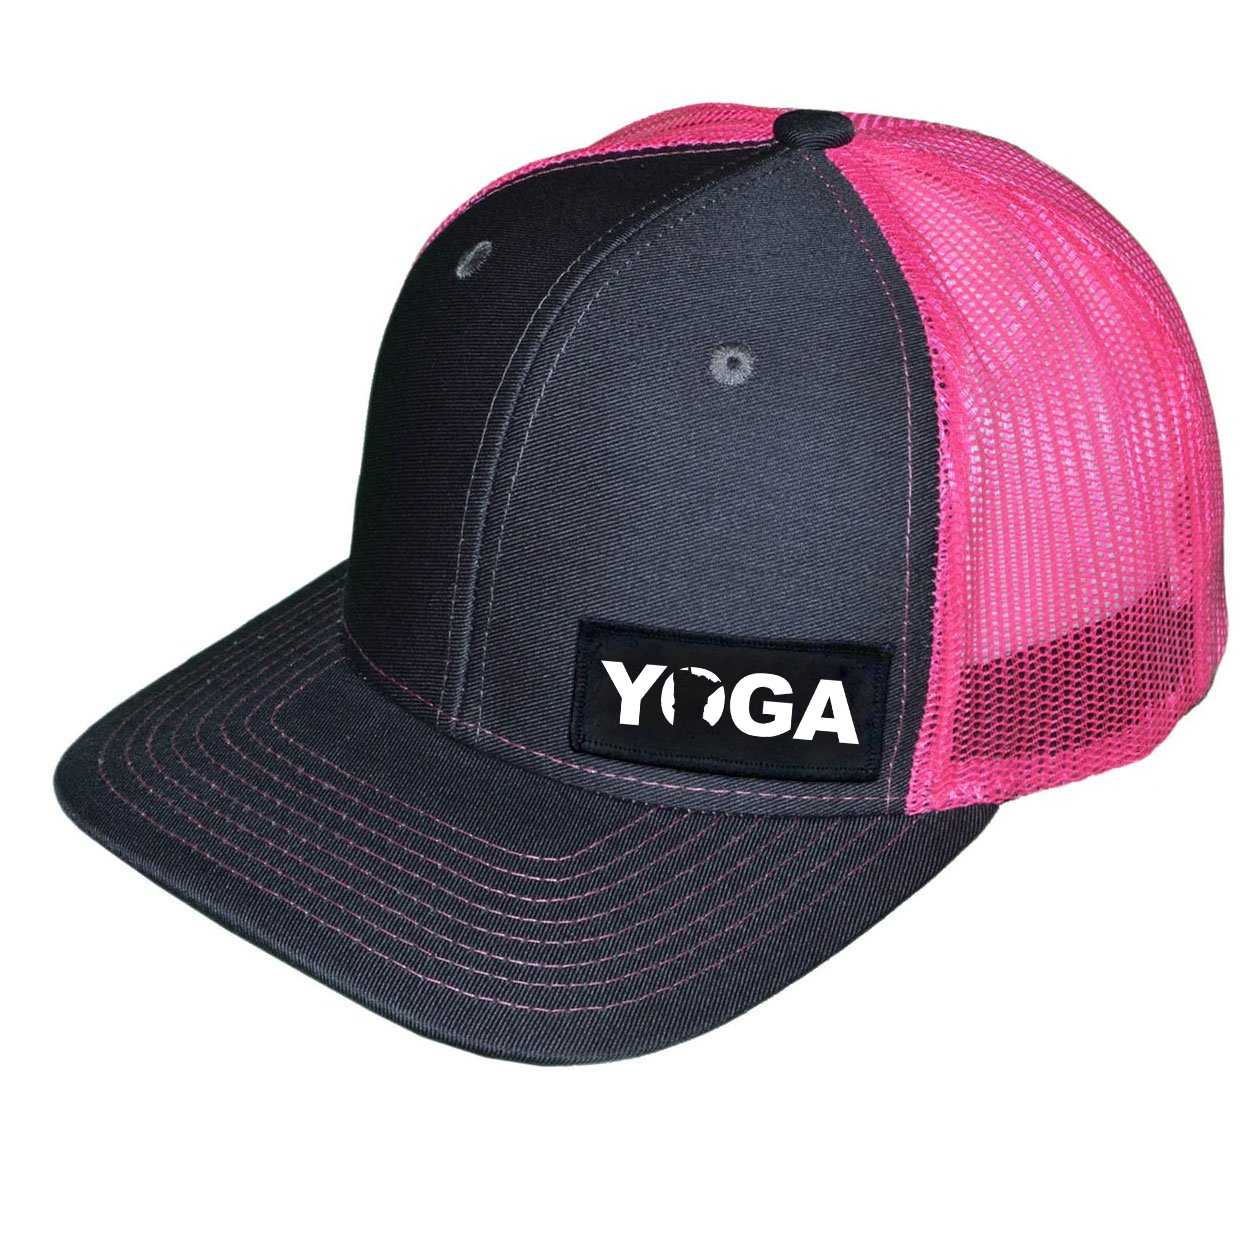 Yoga Minnesota Night Out Woven Patch Snapback Trucker Hat Charcoal/Neon Pink (White Logo)